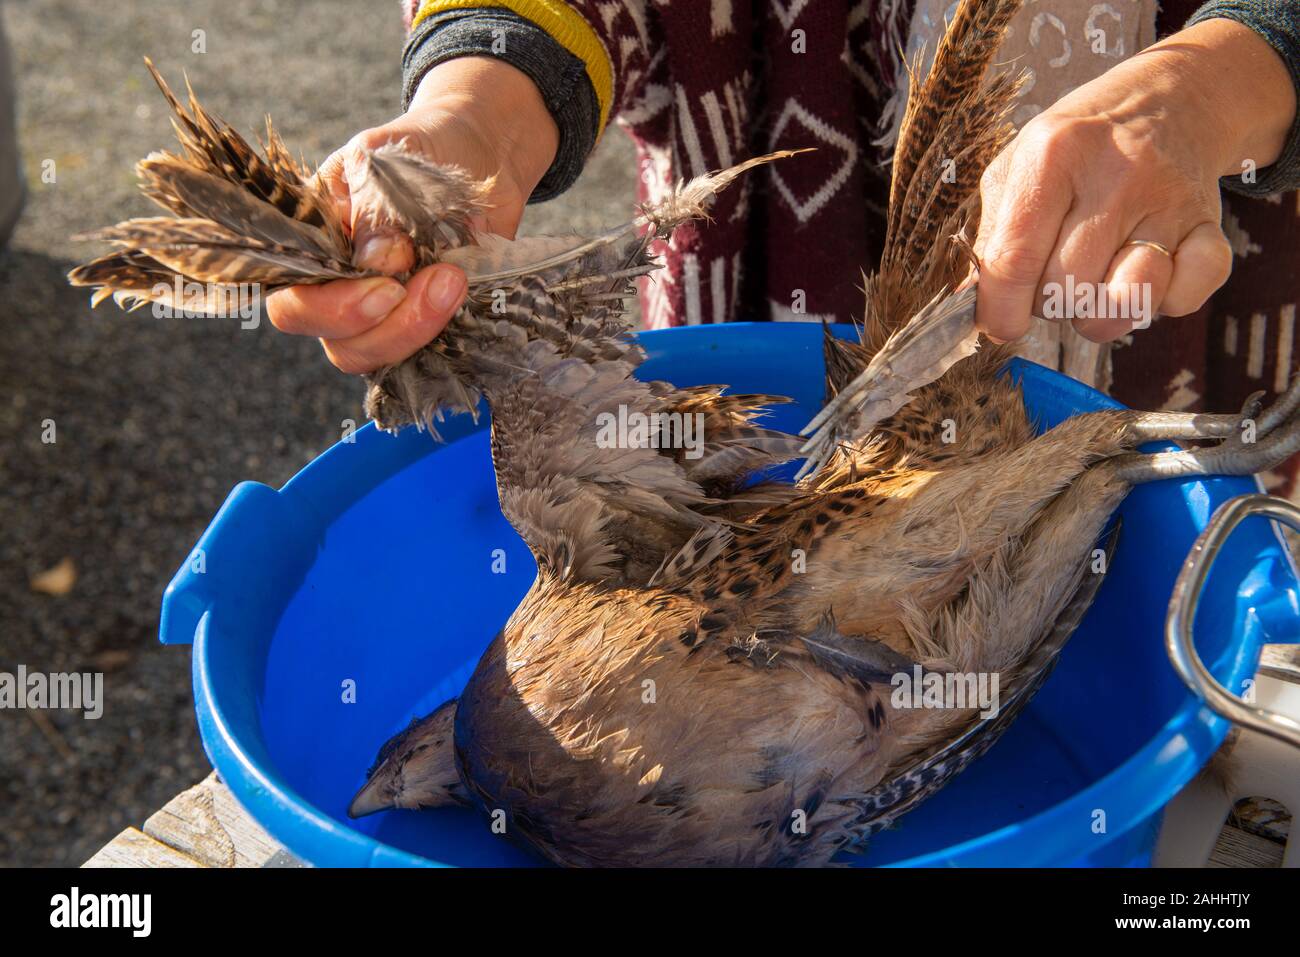 a close up of woman plucking a pheasant Stock Photo